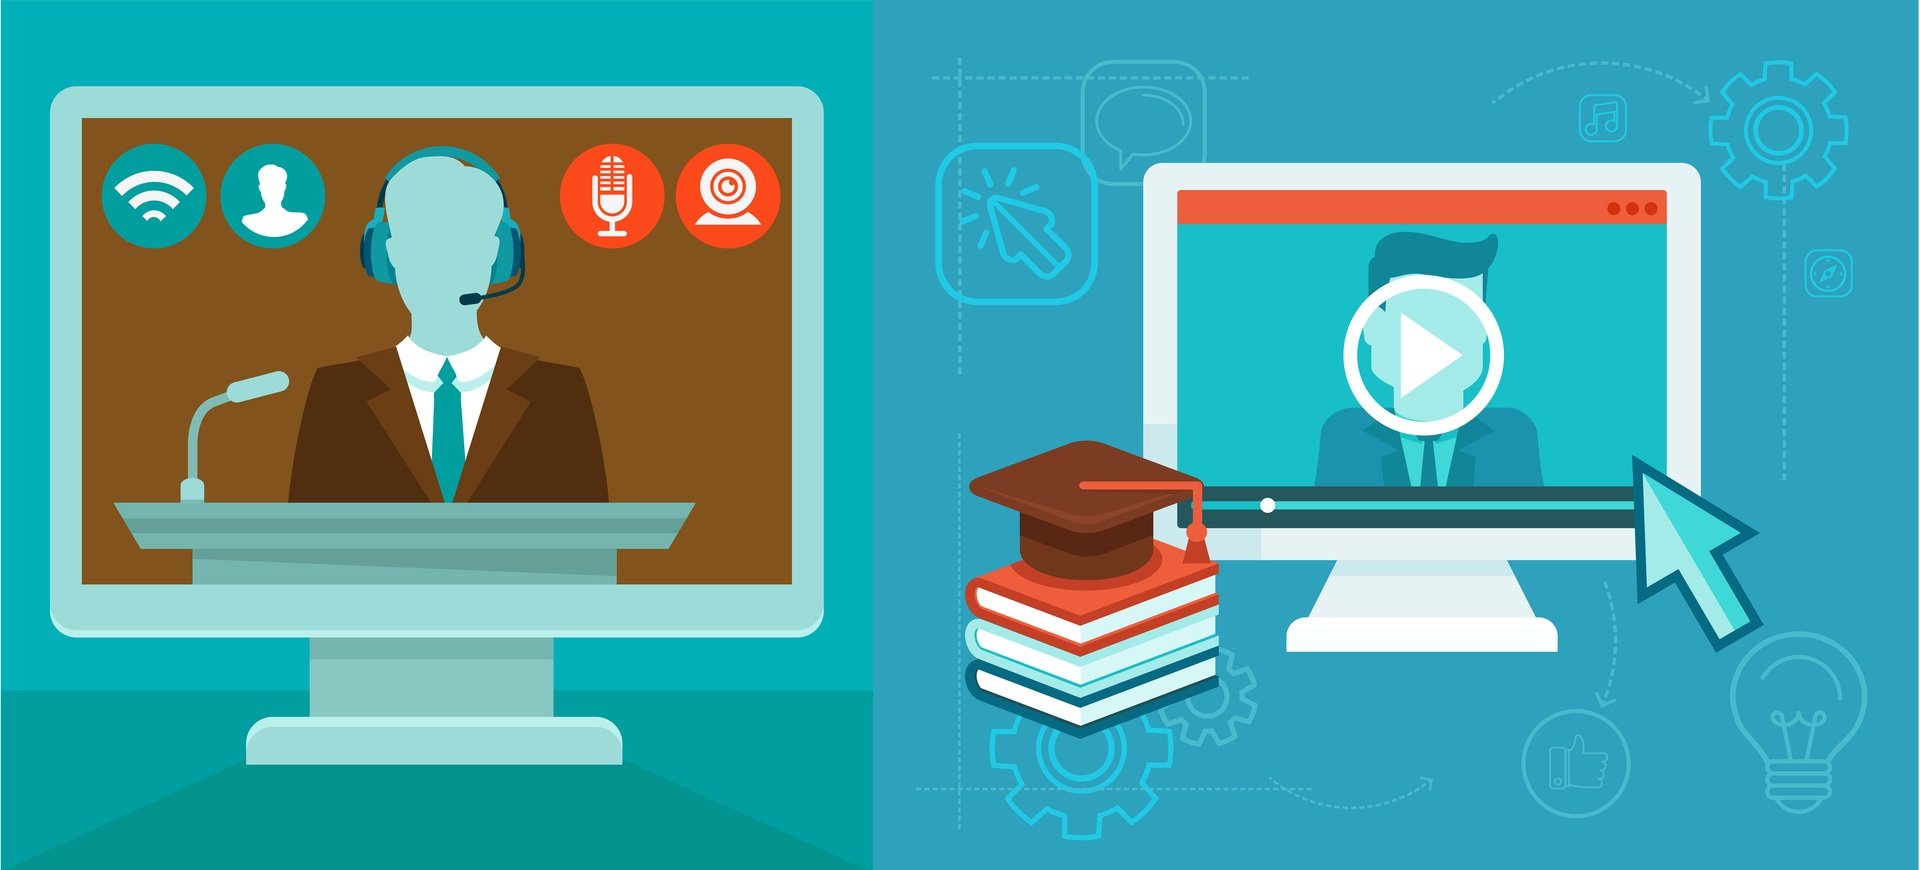 Asynchronous online learning provides